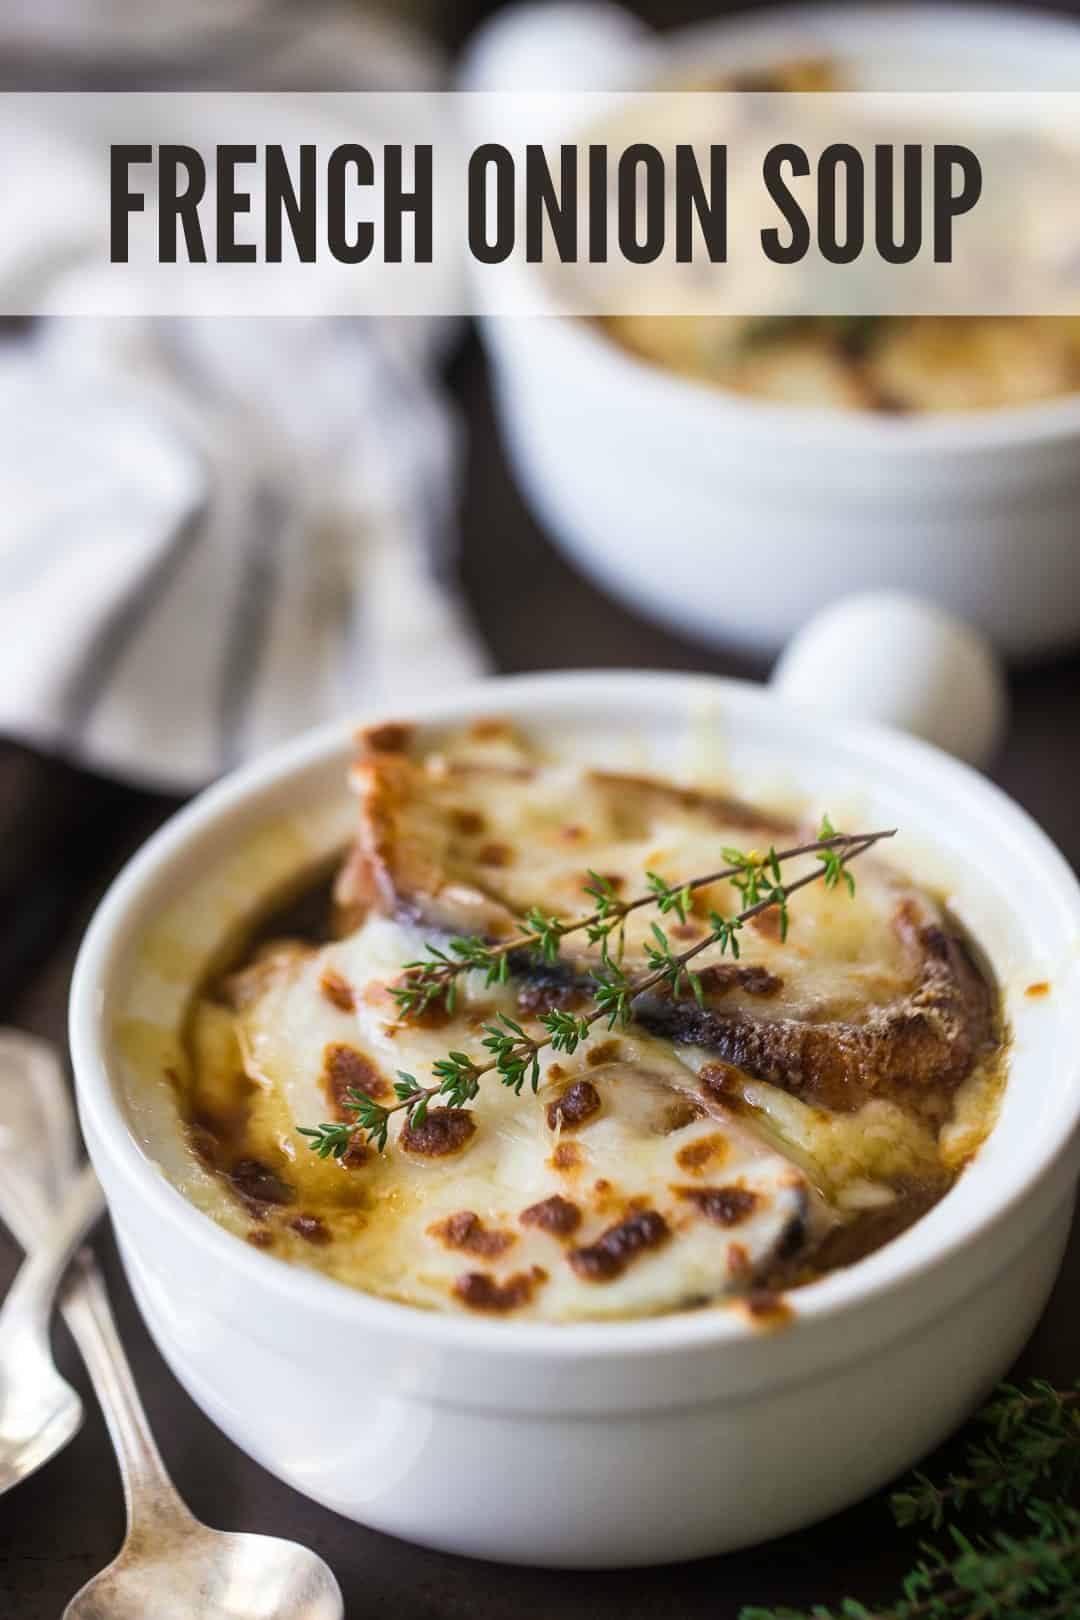 Homemade French onion soup recipe served in ceramic crocks, with melted cheese and fresh thyme, and a text overlay above reading "French Onion Soup."